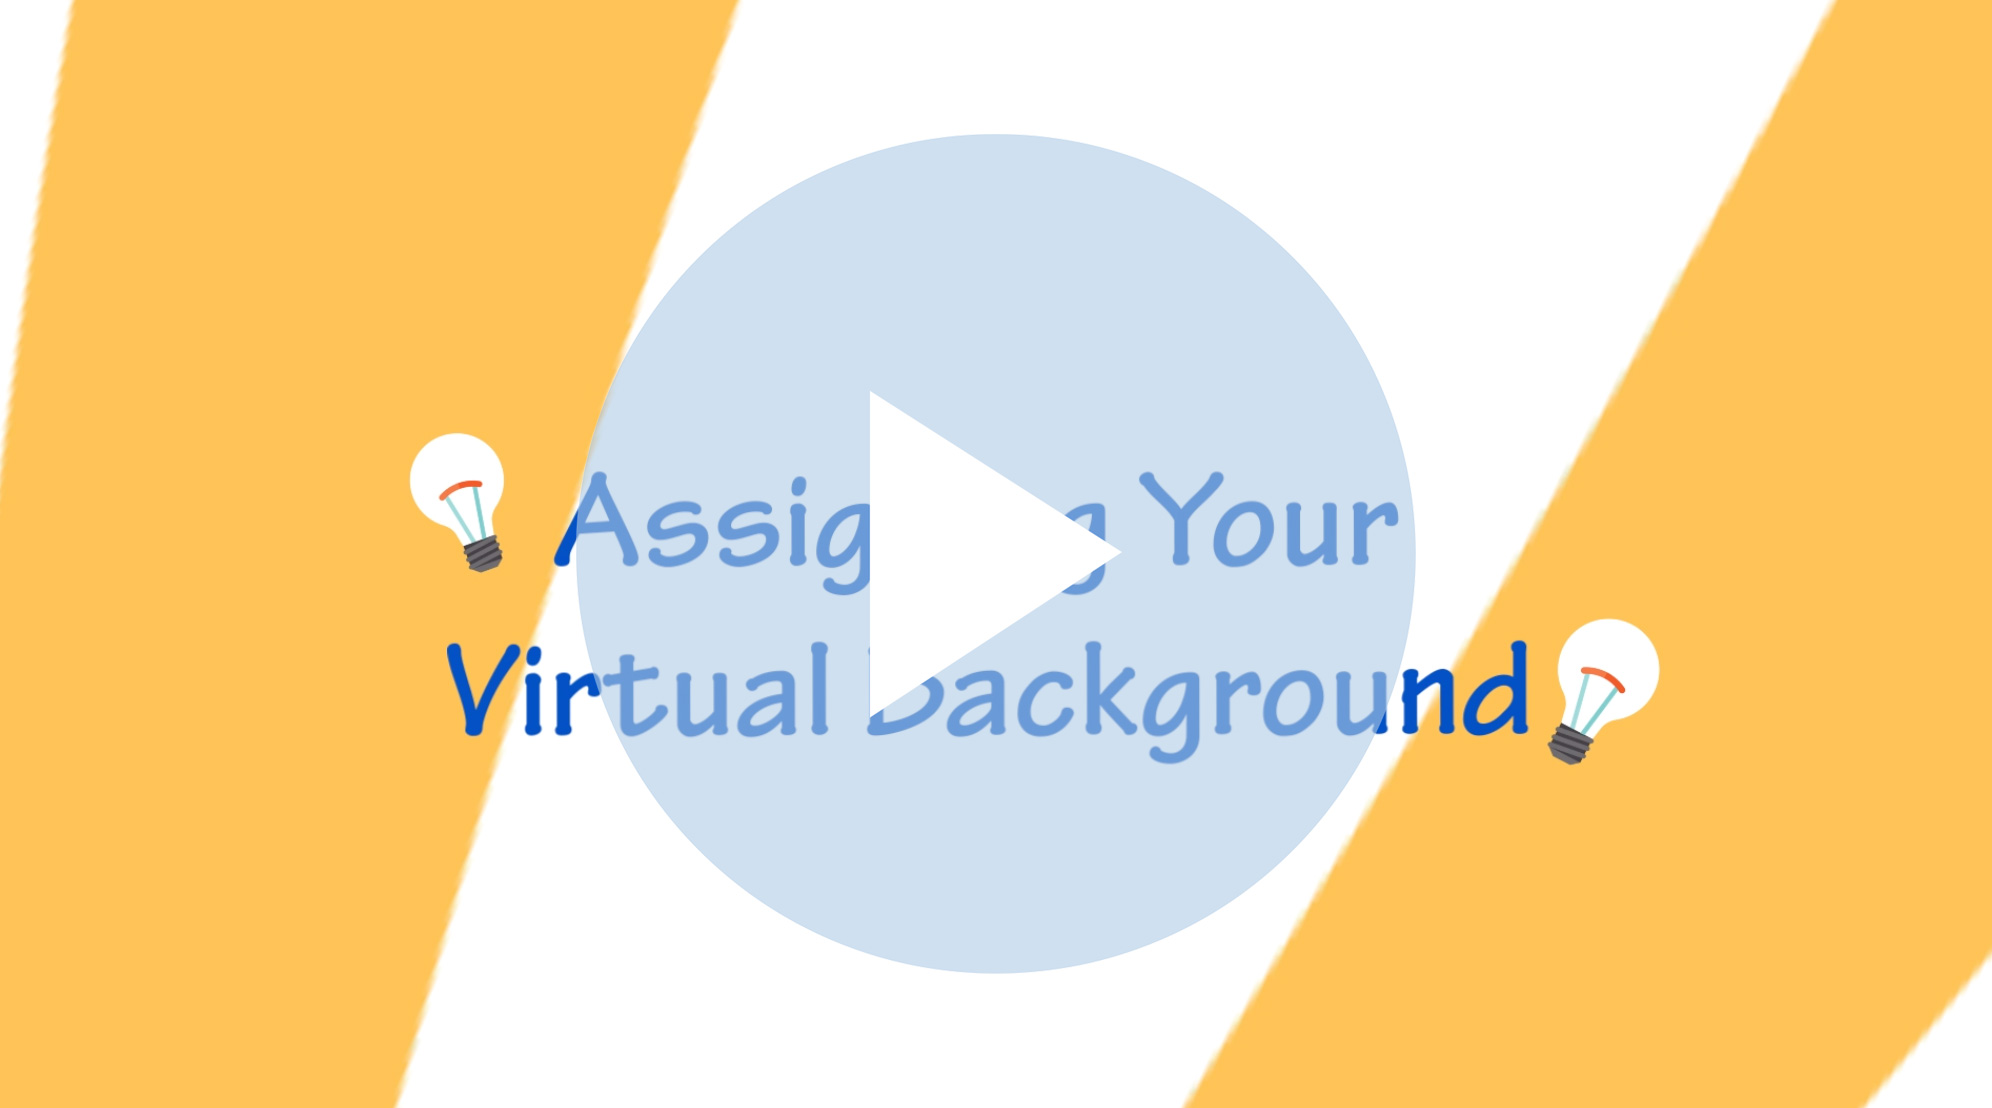 Assigning Your Virtual Background